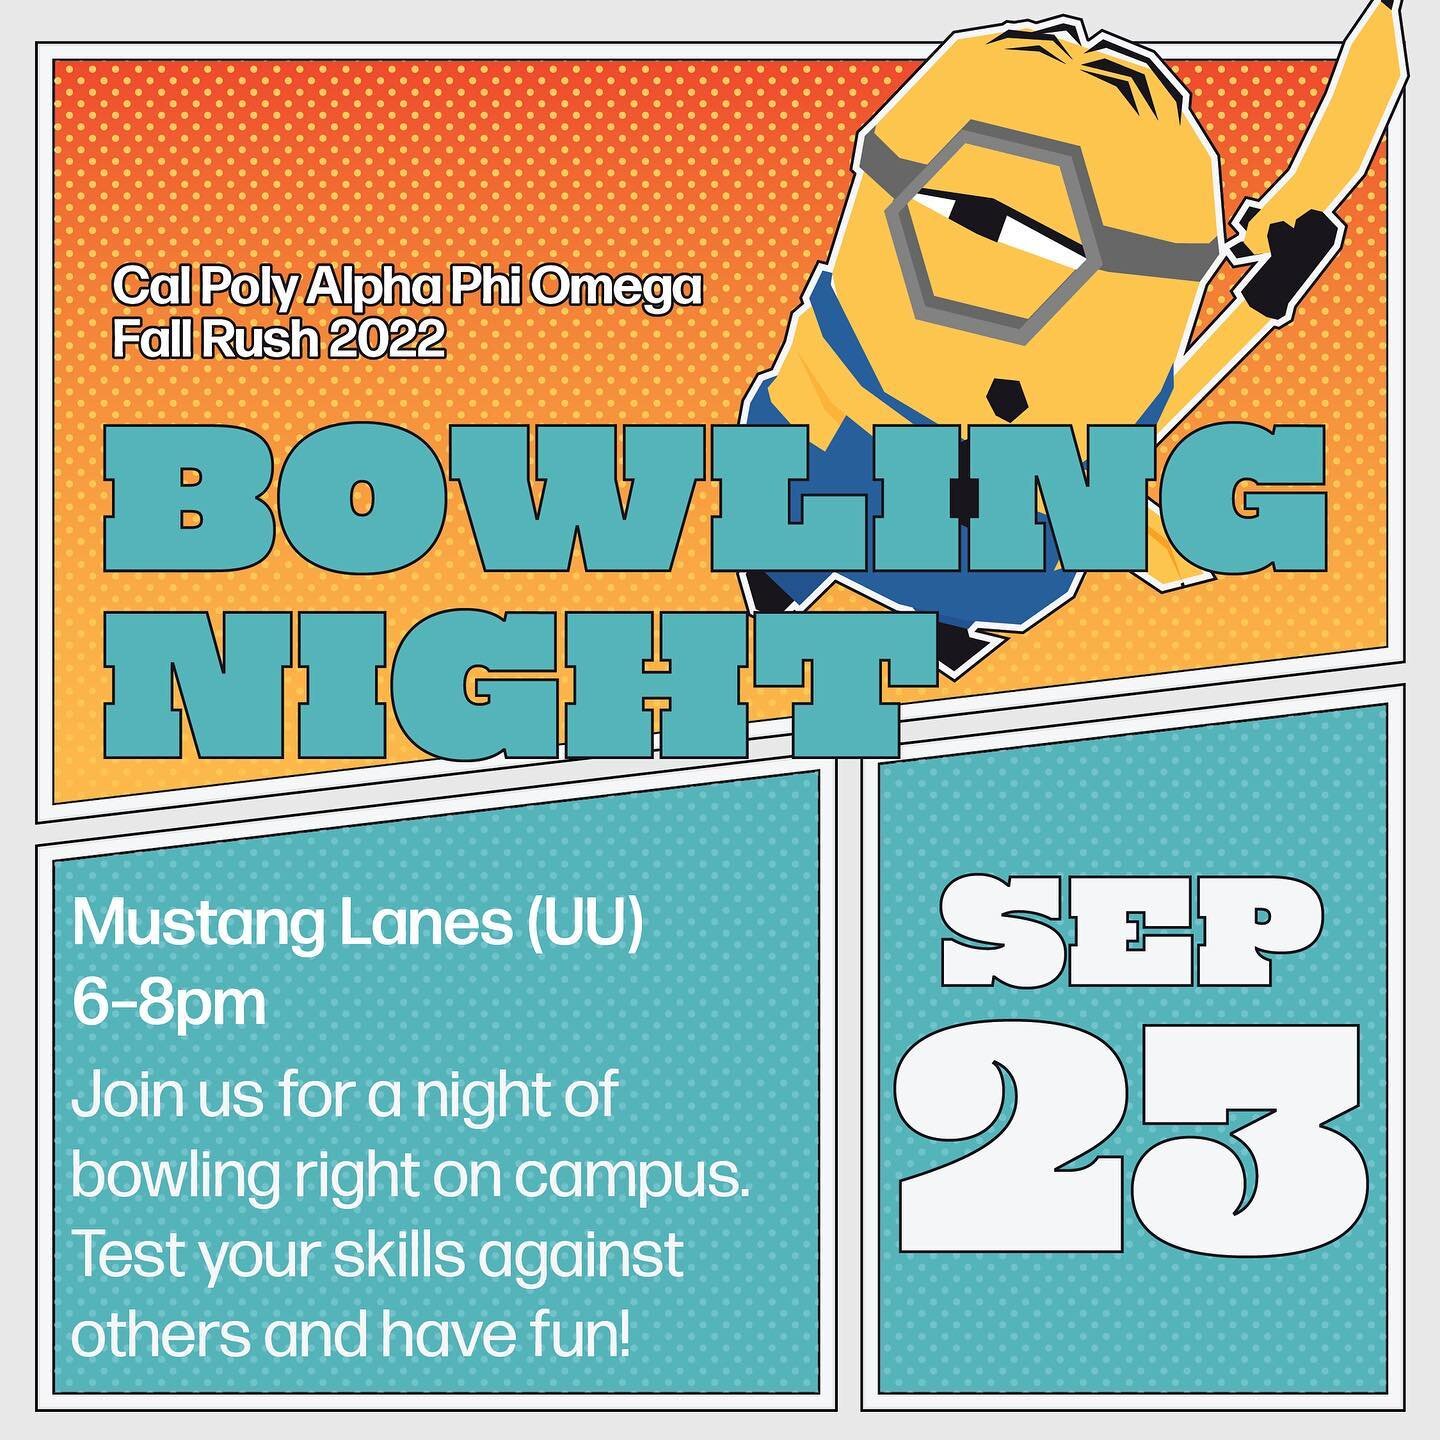 Why do minions like bananas so much?

They find them a-peeling!

Test your skills with some bowling with us in our campus&rsquo;s own Mustang Lanes over at the UU at 6pm TOMORROW! Sign the interest form in our bio!